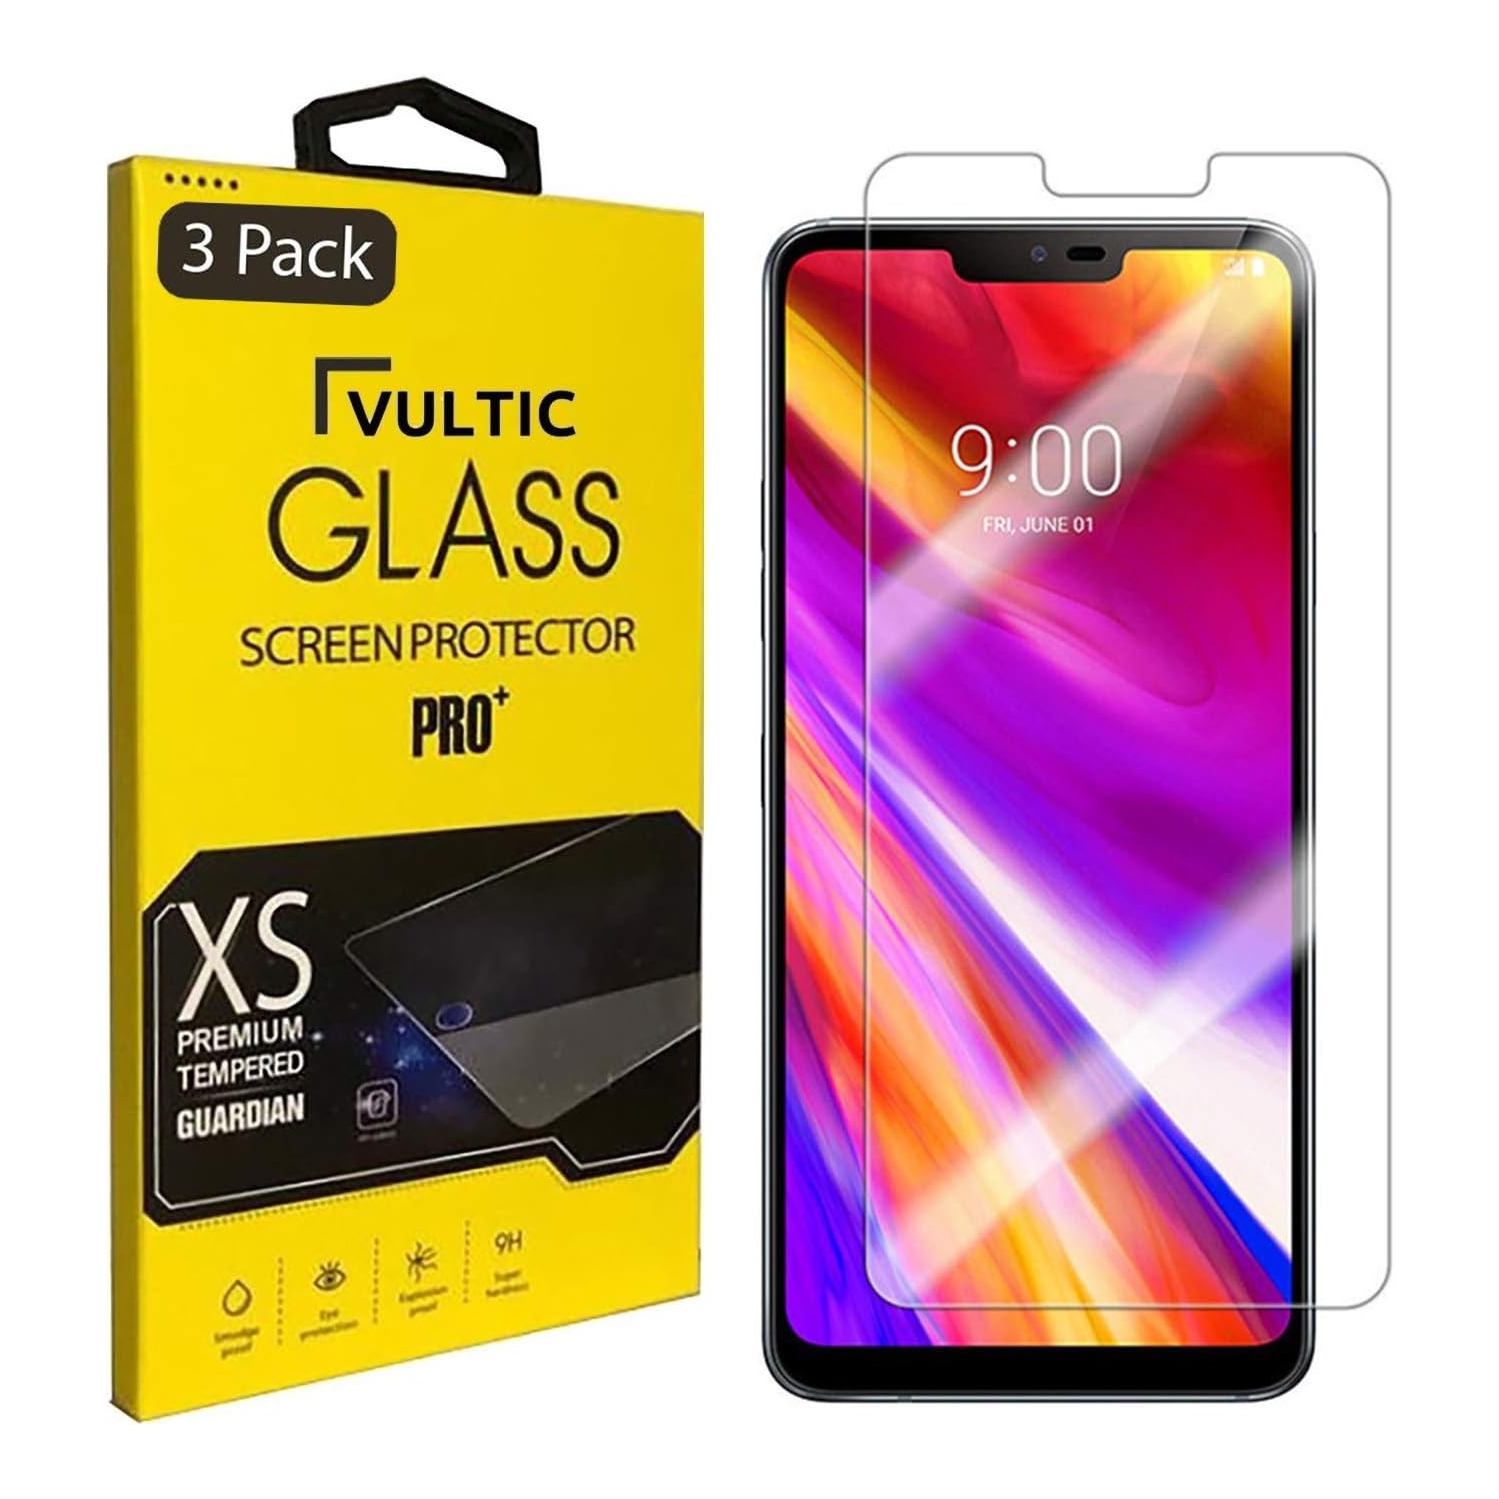 [3 Pack] Screen Protector for LG G7 ThinQ/LG G7 One/LG G8 ThinQ [Case Friendly], Tempered Glass Film Cover